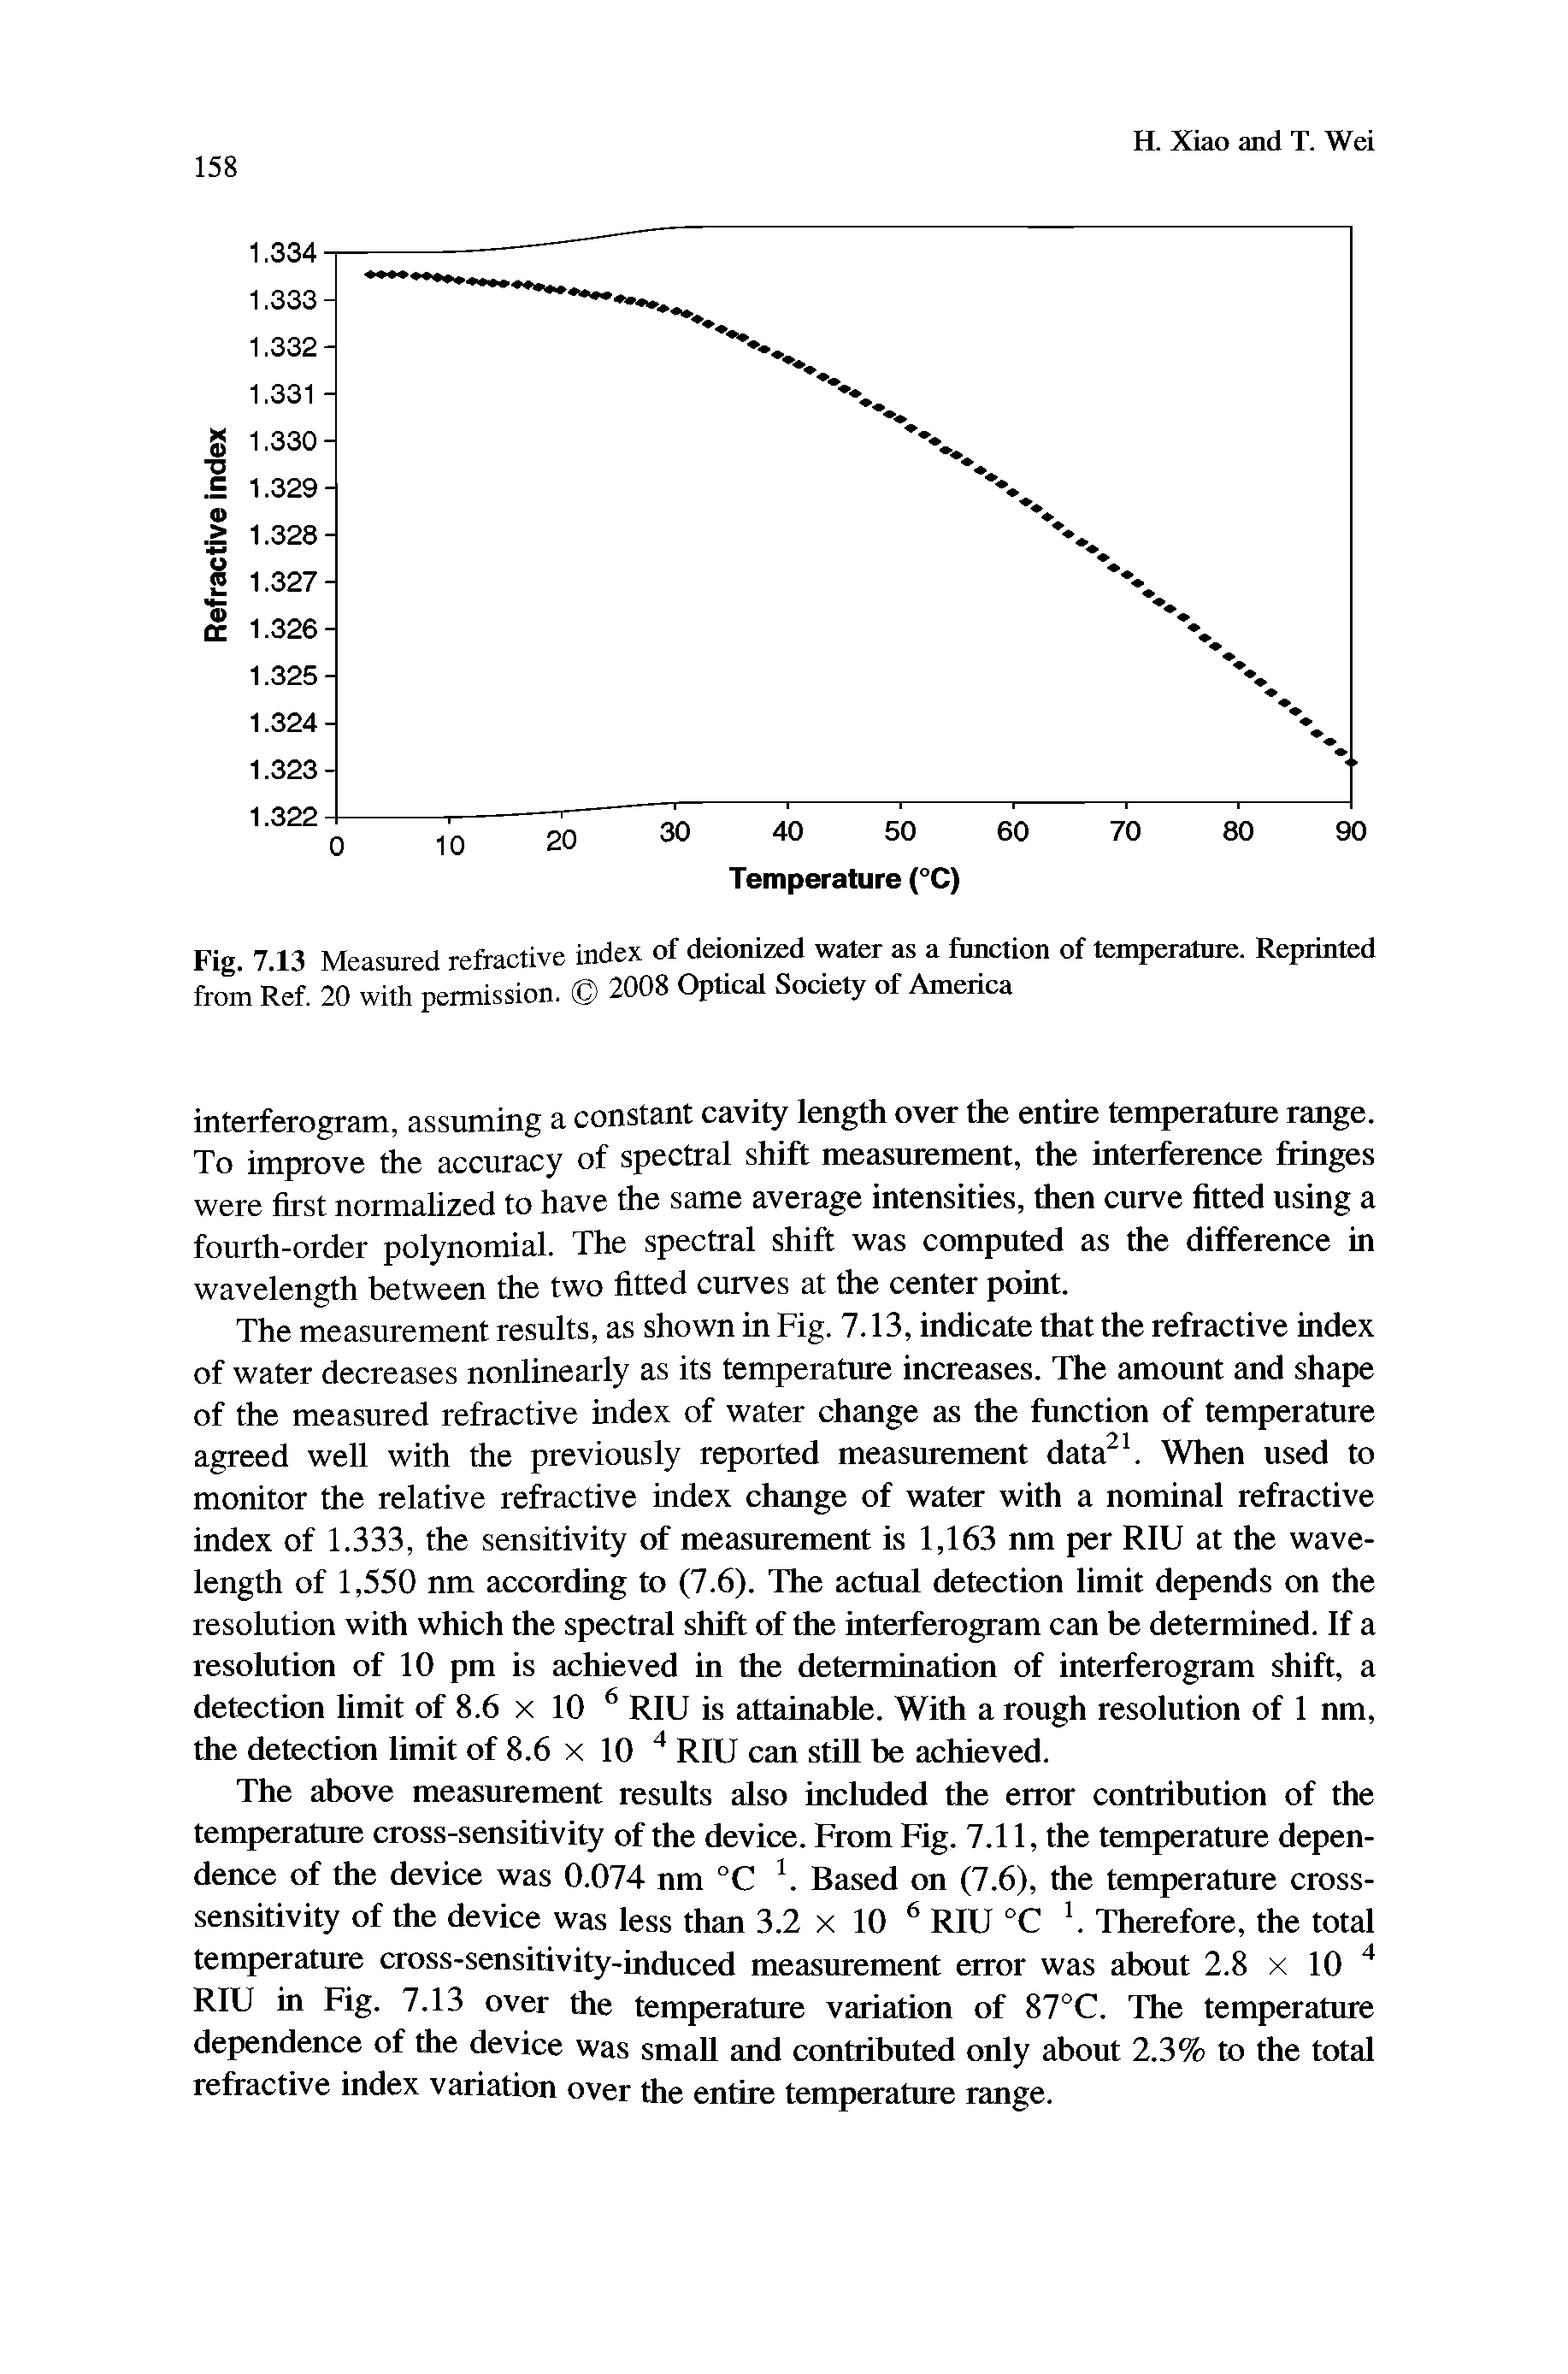 Fig. 7.13 Measured refractive index of deionized water as a function of temperature. Reprinted from Ref. 20 with permission. 2008 Optical Society of America...